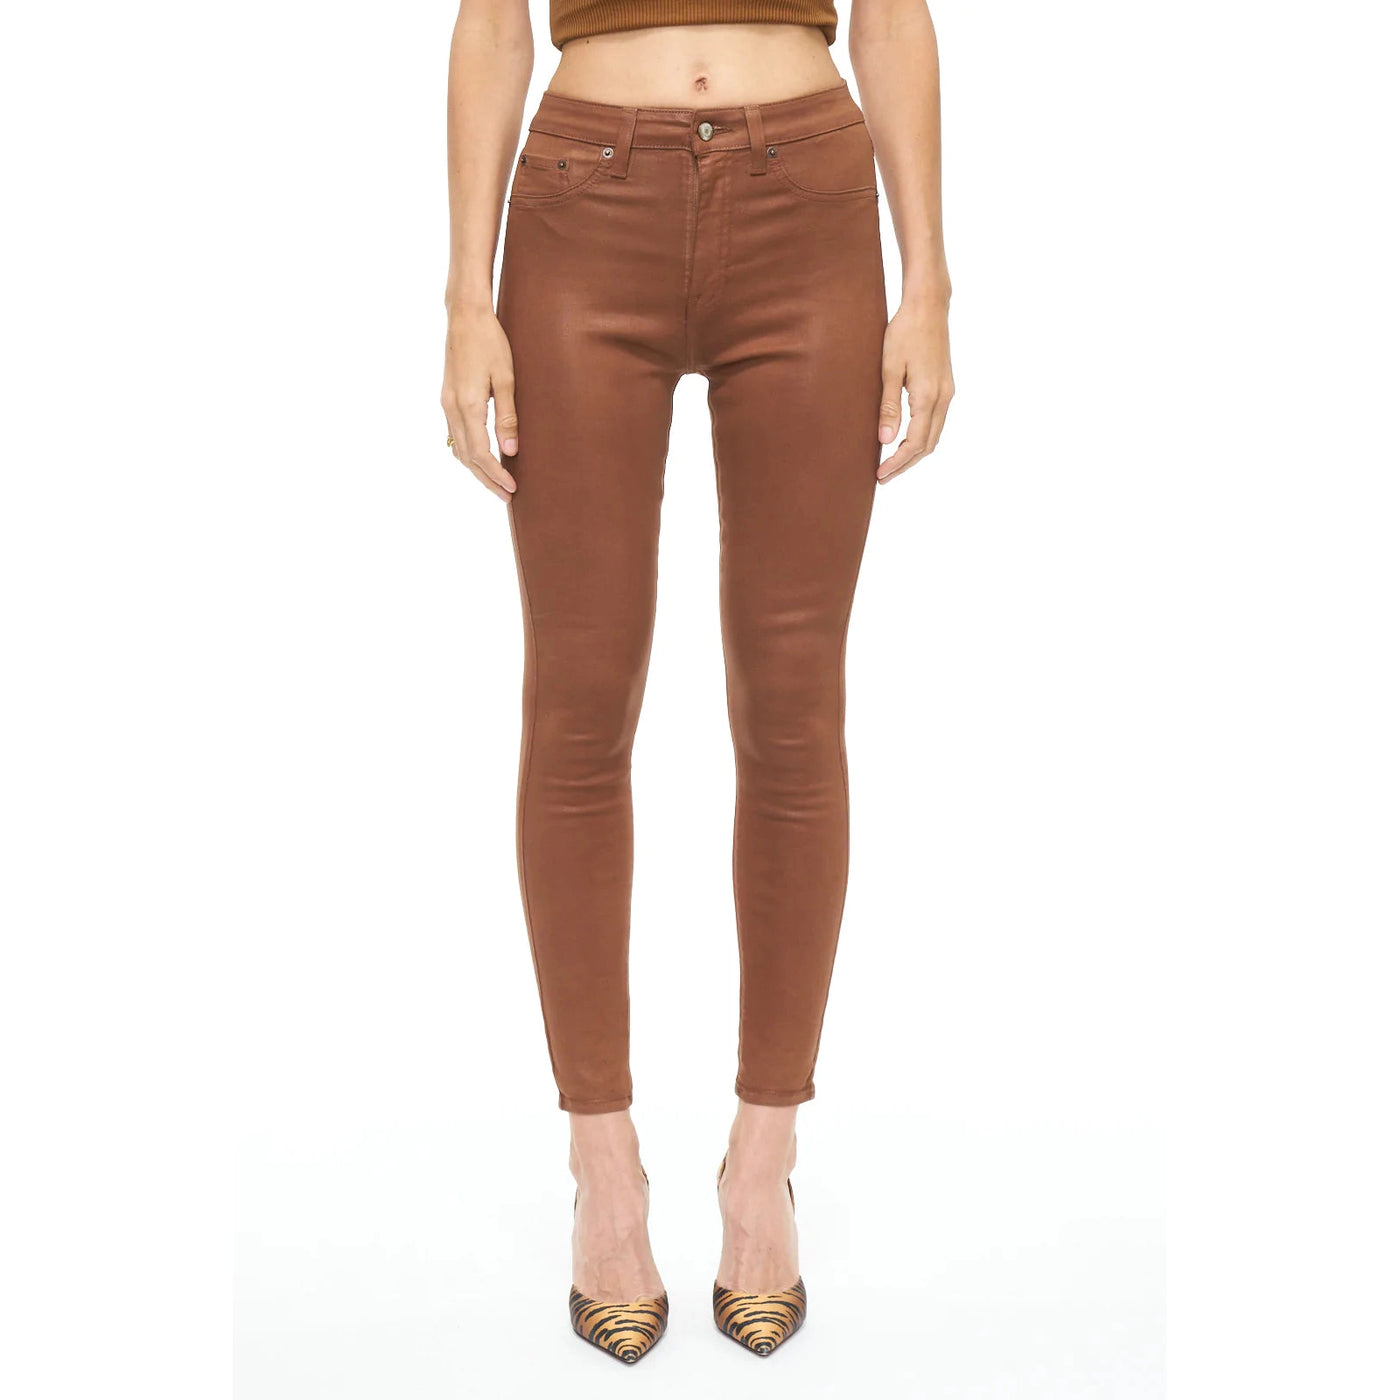 Pistola Aline High Rise Skinny Jeans-Women's Clothing-COATED COGNAC-25-Kevin's Fine Outdoor Gear & Apparel